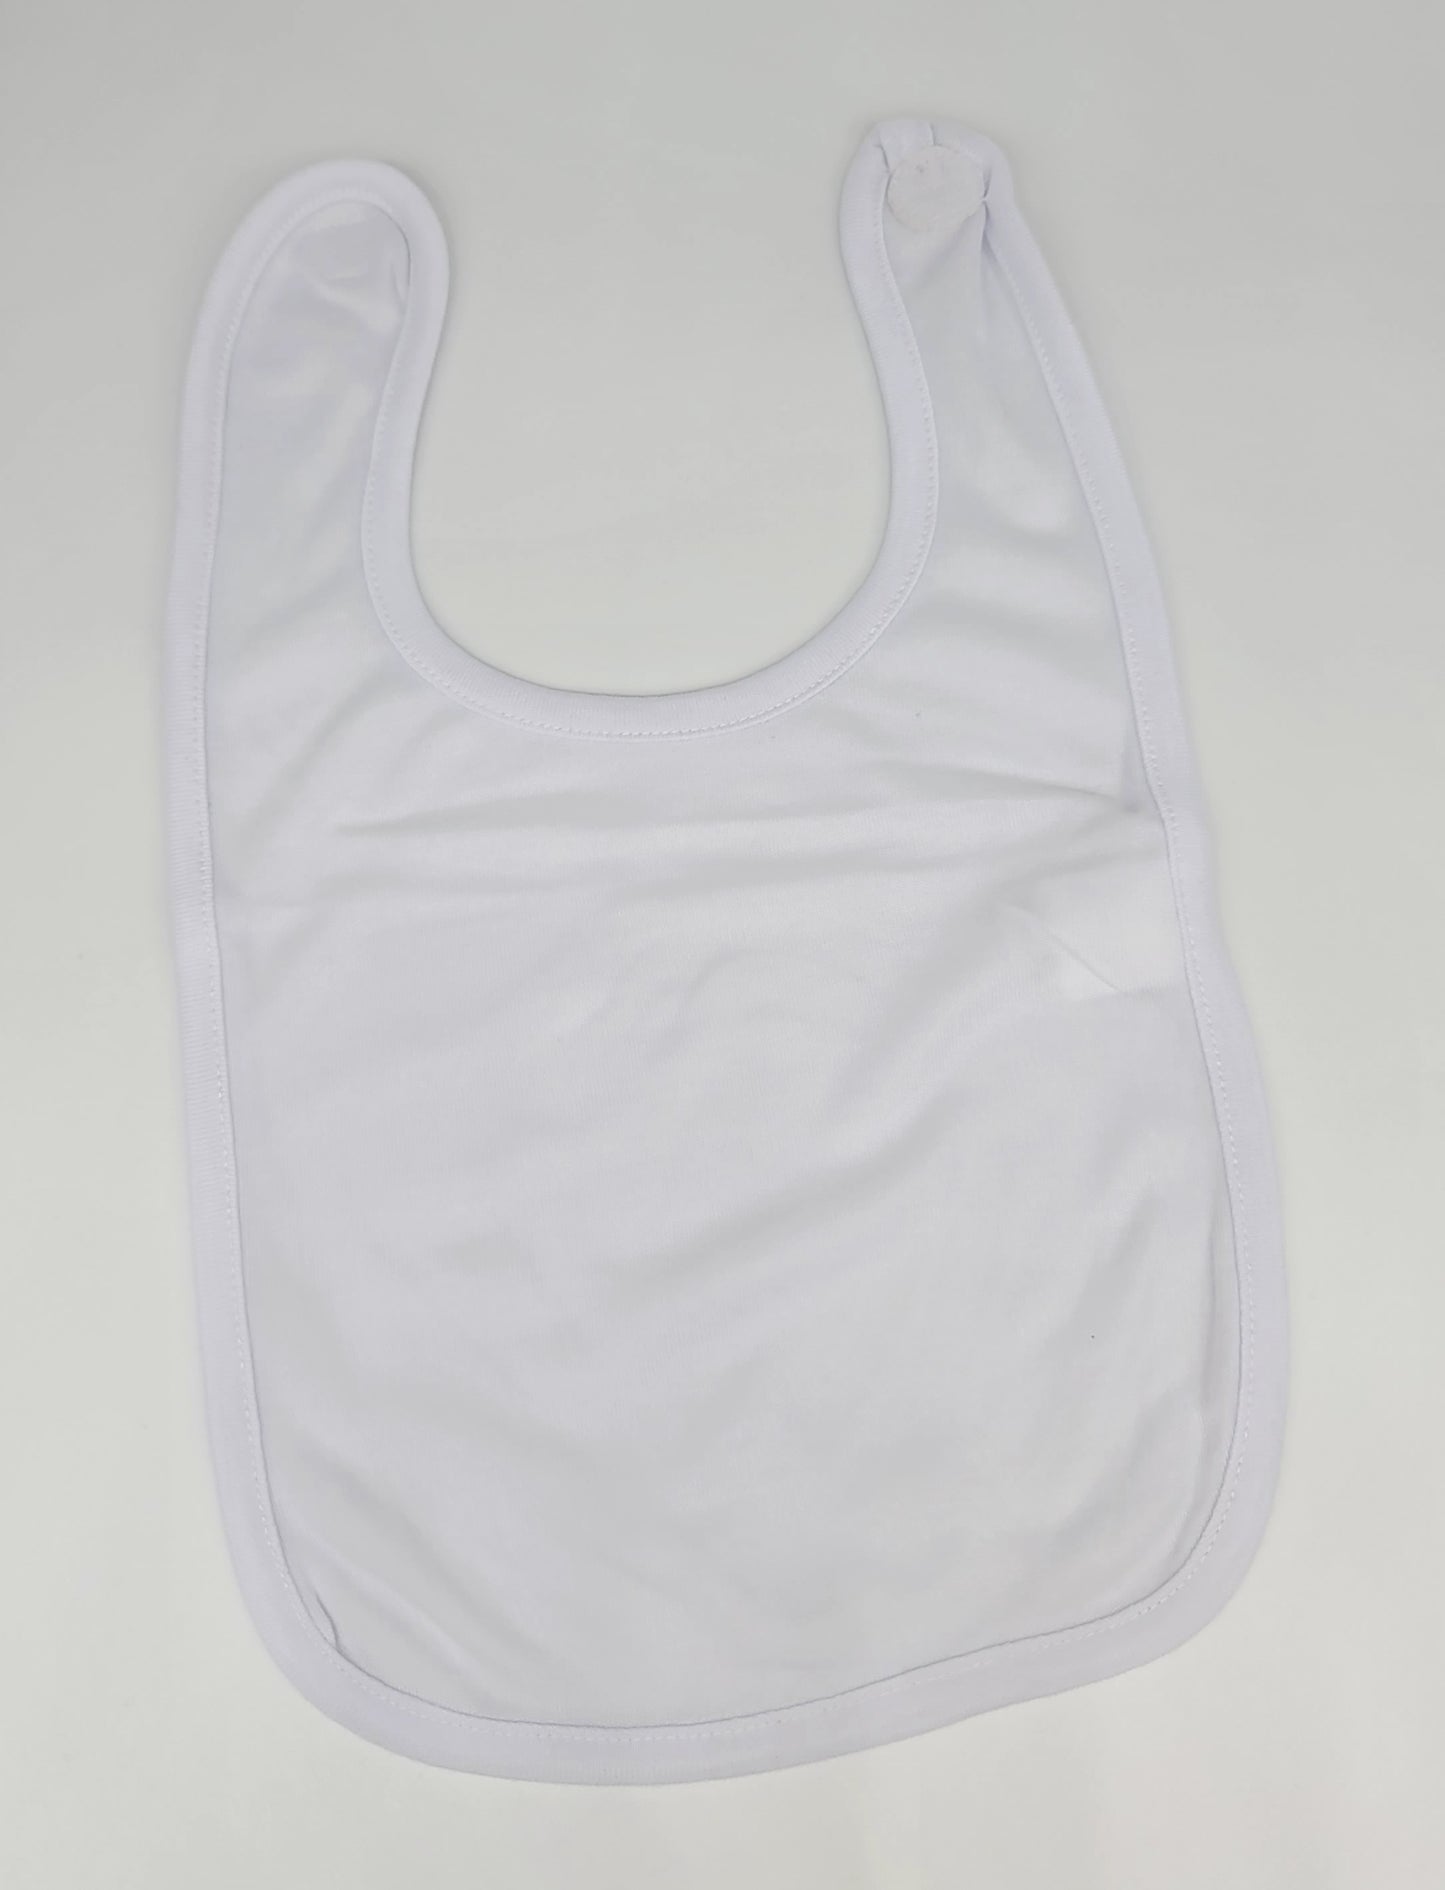 Baby Bib For Sublimation